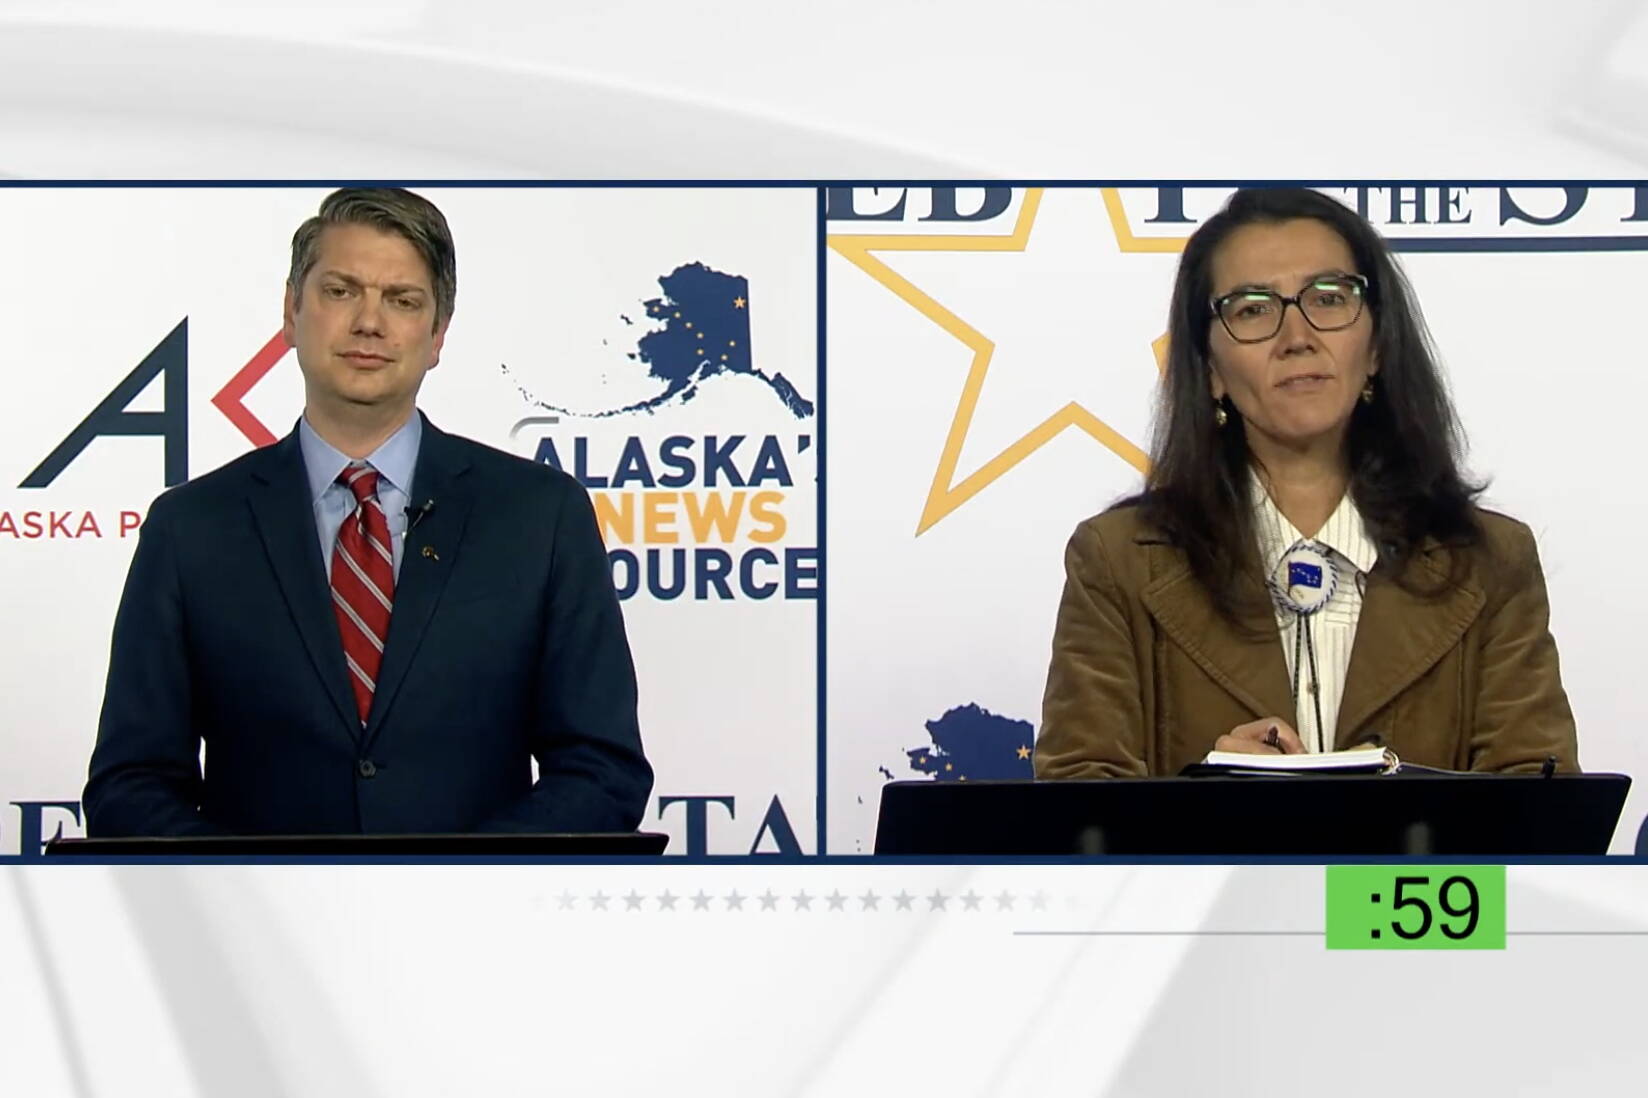 Screenshot 
Republican Nick Begich, left, challenges Democratic U.S. Rep. Mary Peltola about her retaining much of former Rep. Don Young’s staff during a statewide televised debate Wednesday.